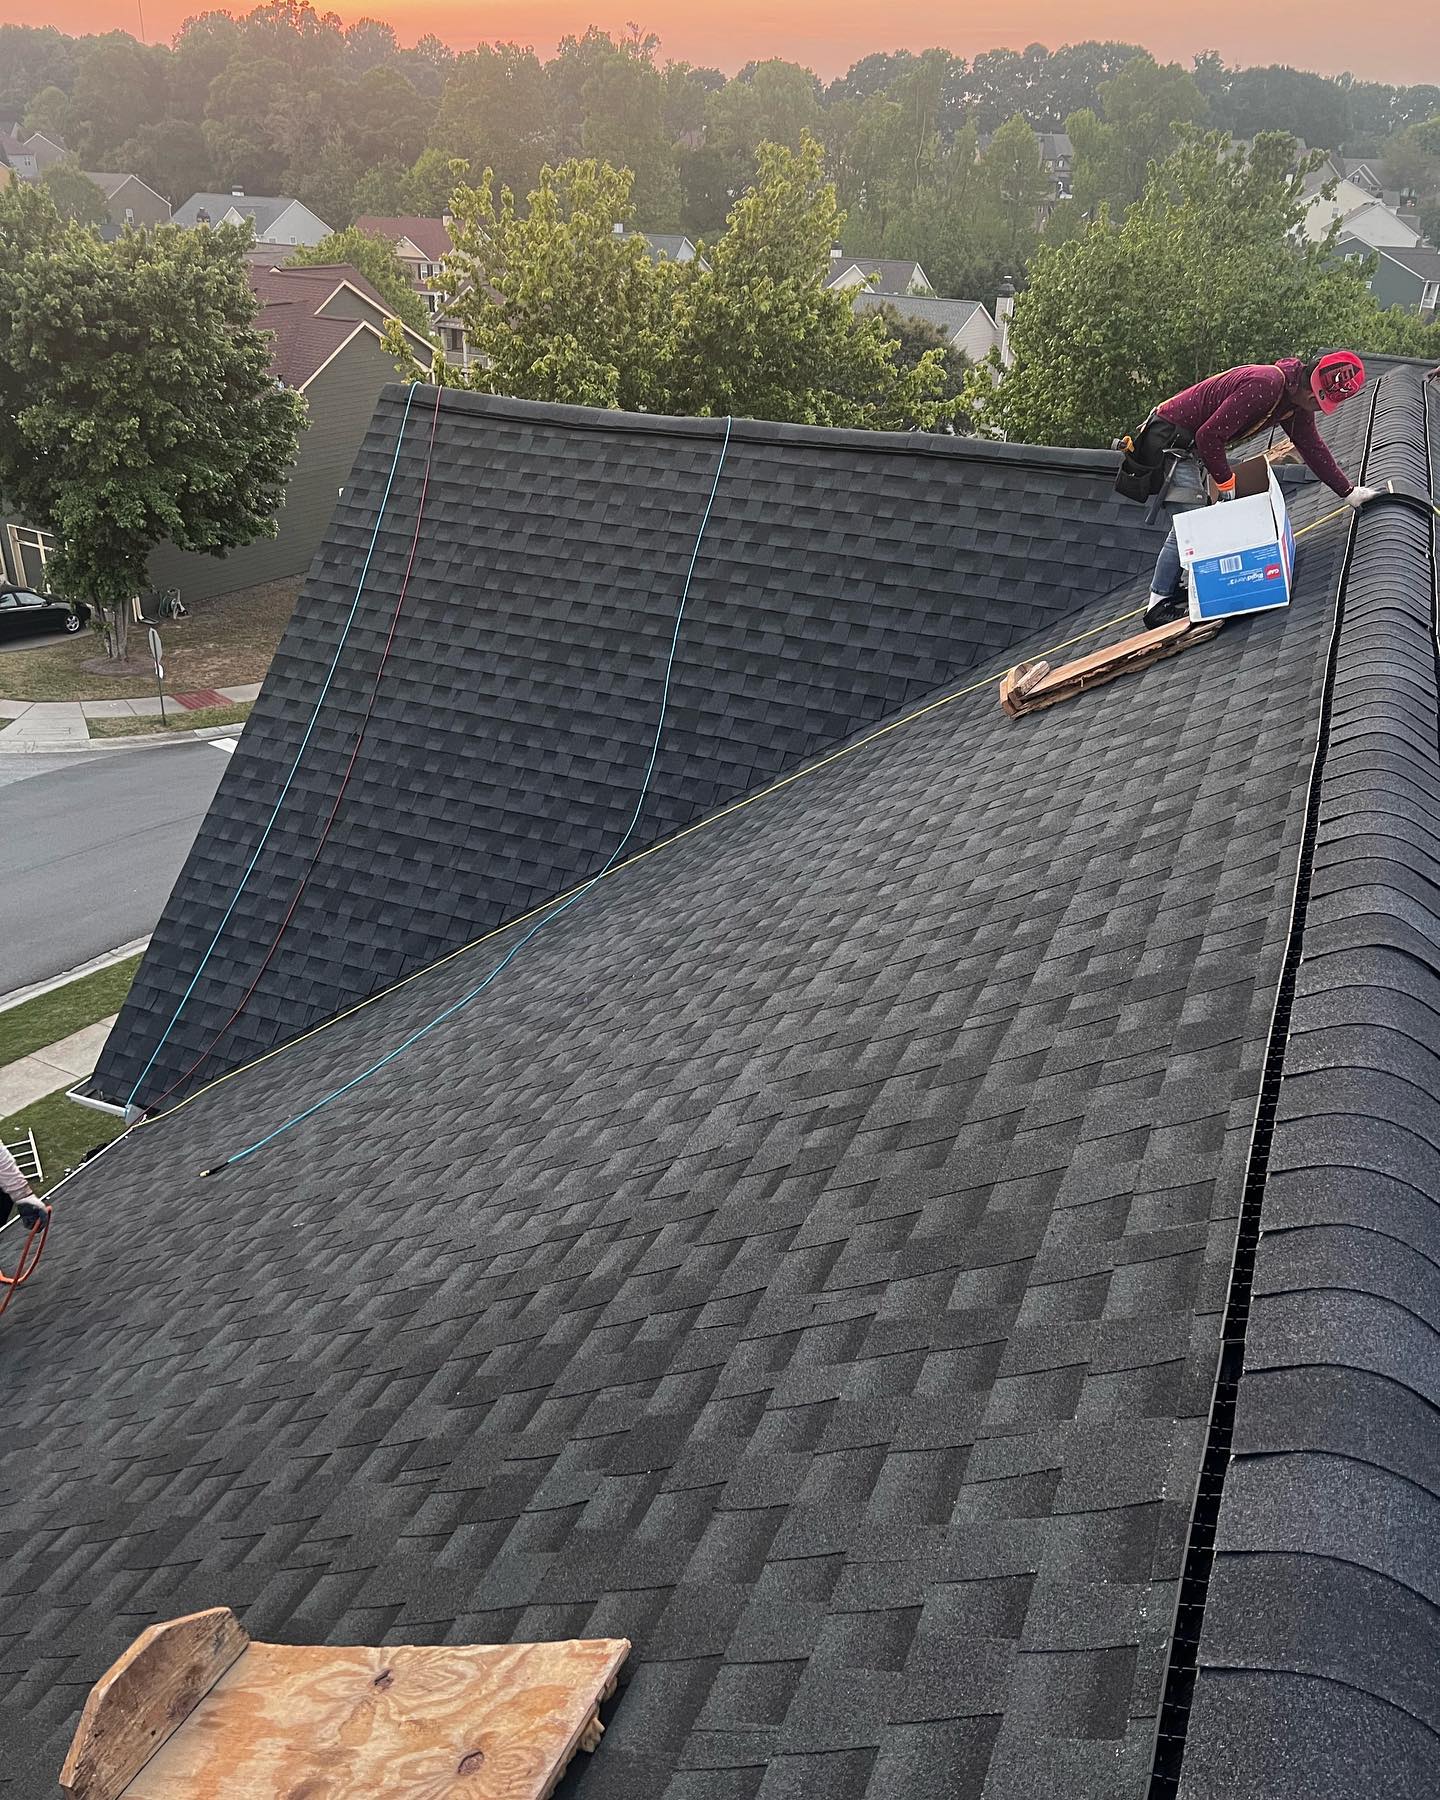 Results of a recent residential roof installation